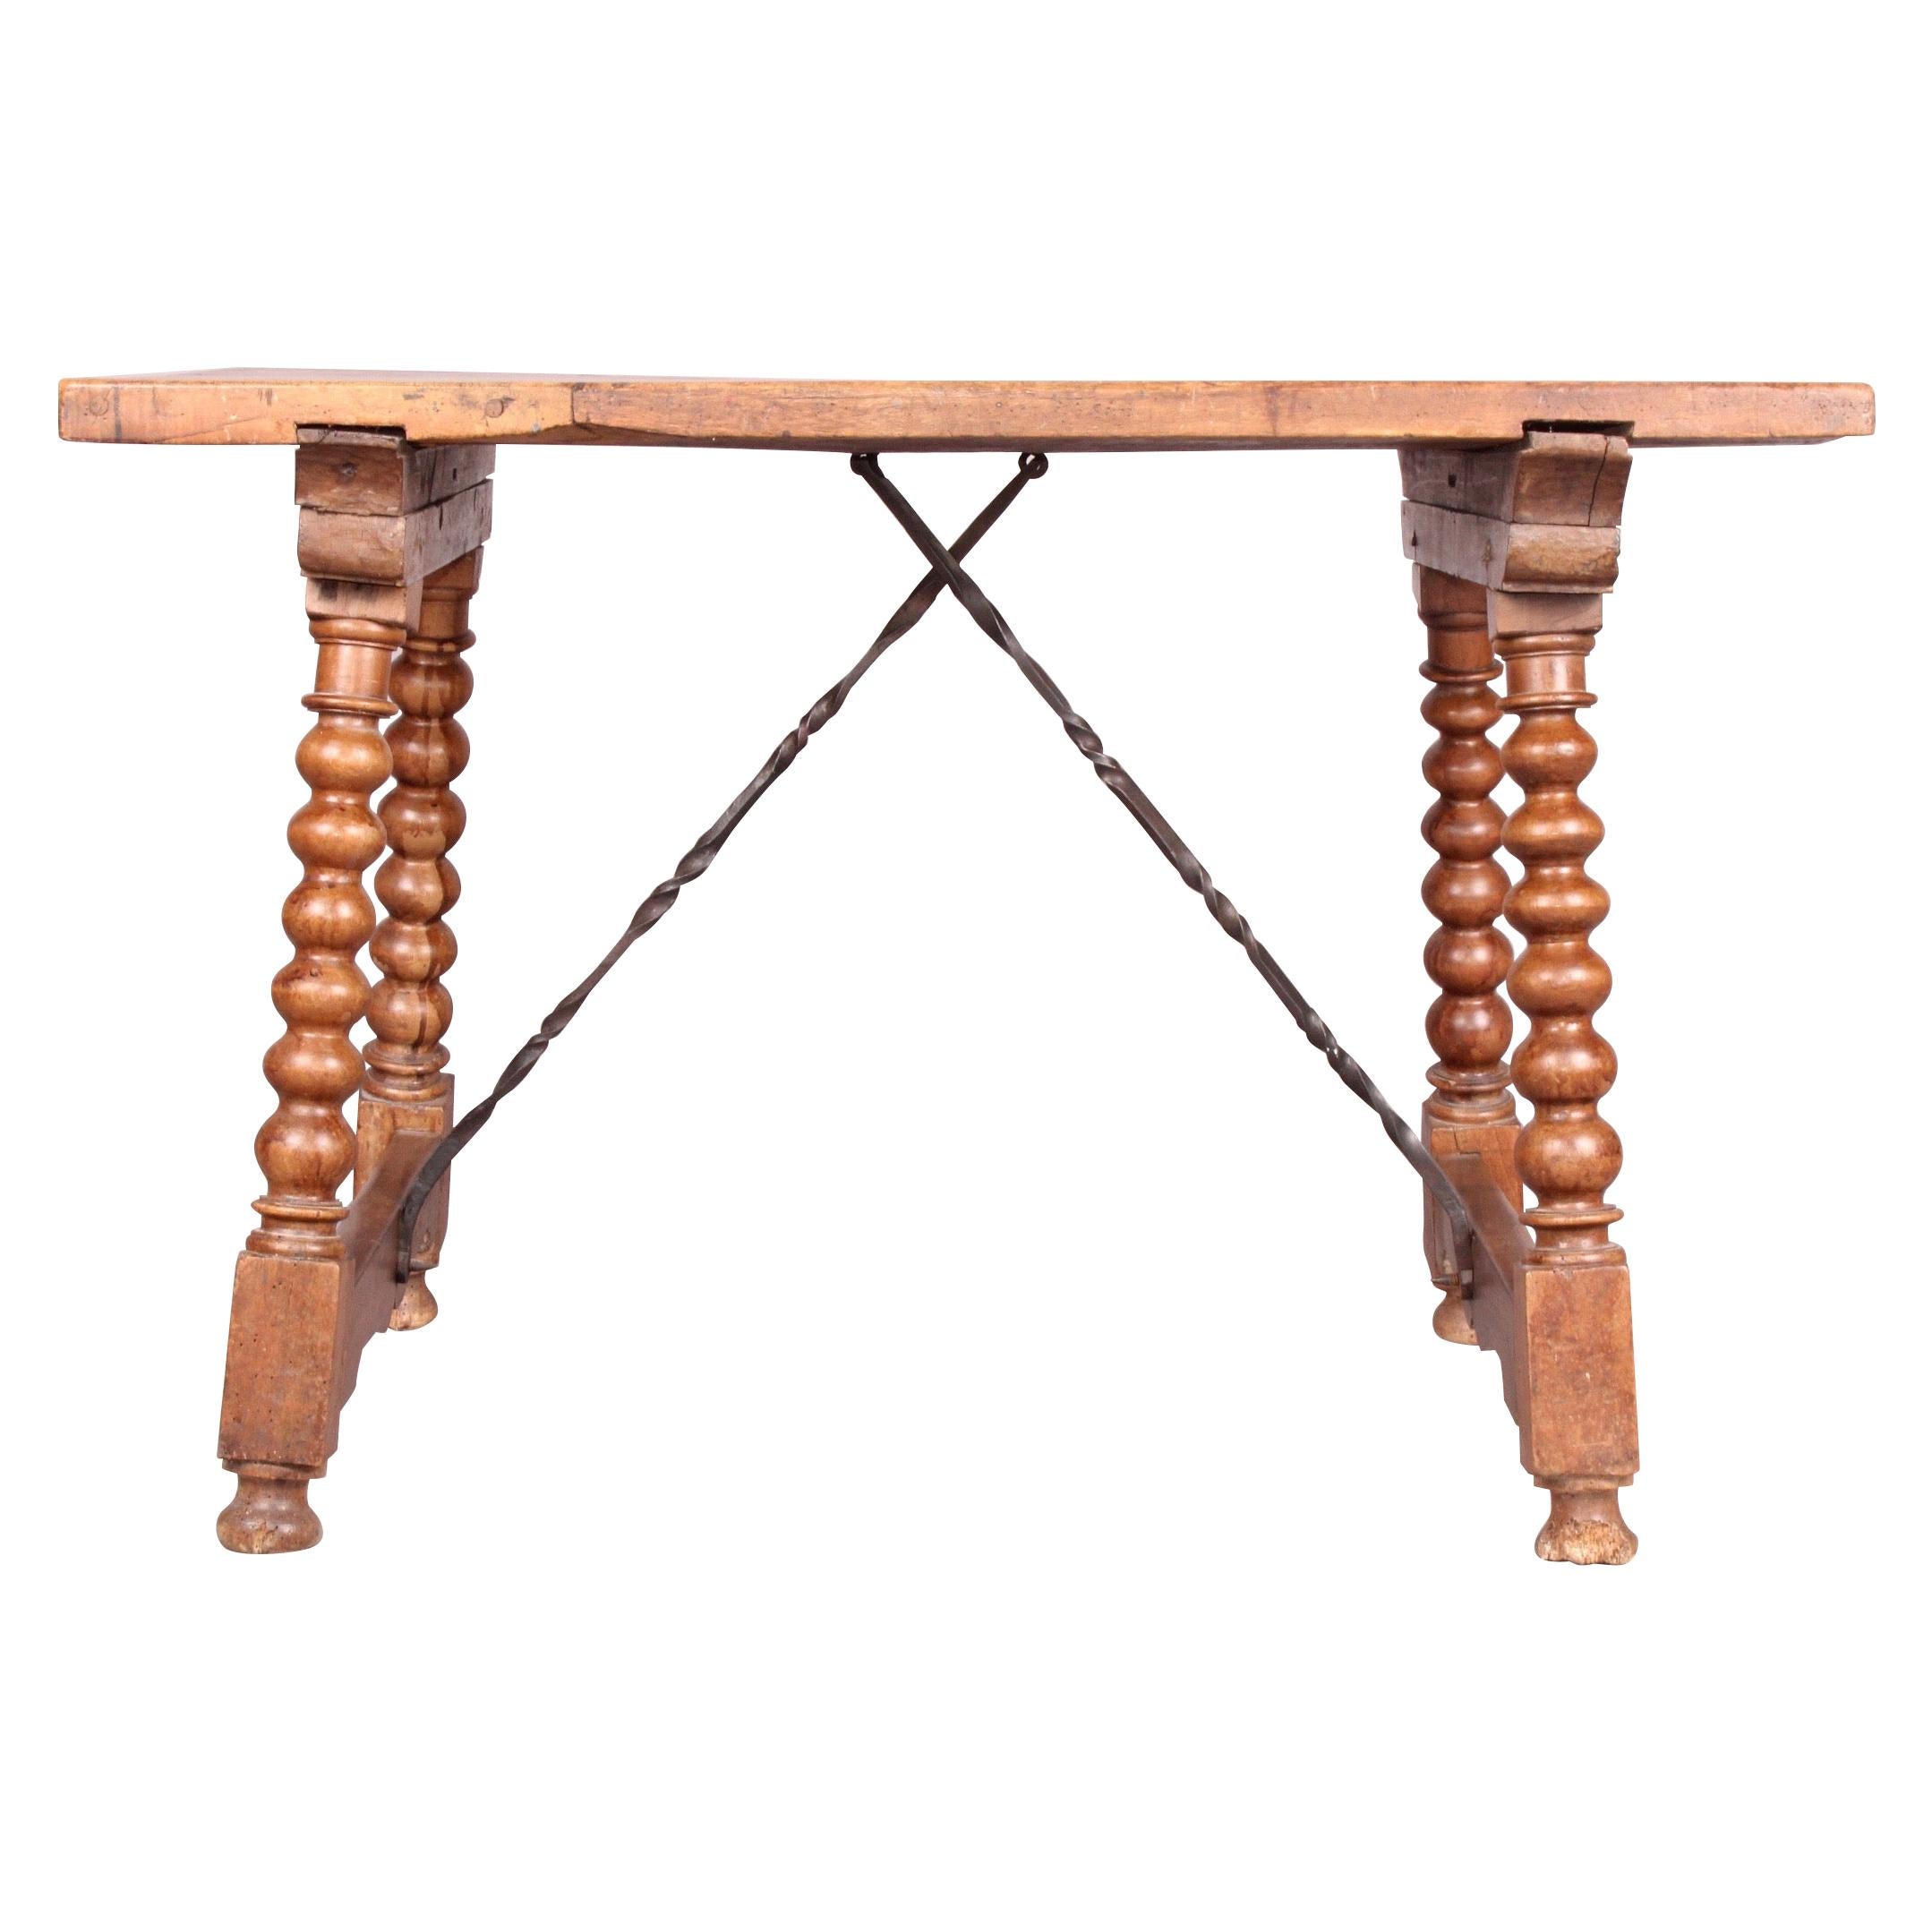 L XIII Wood Table